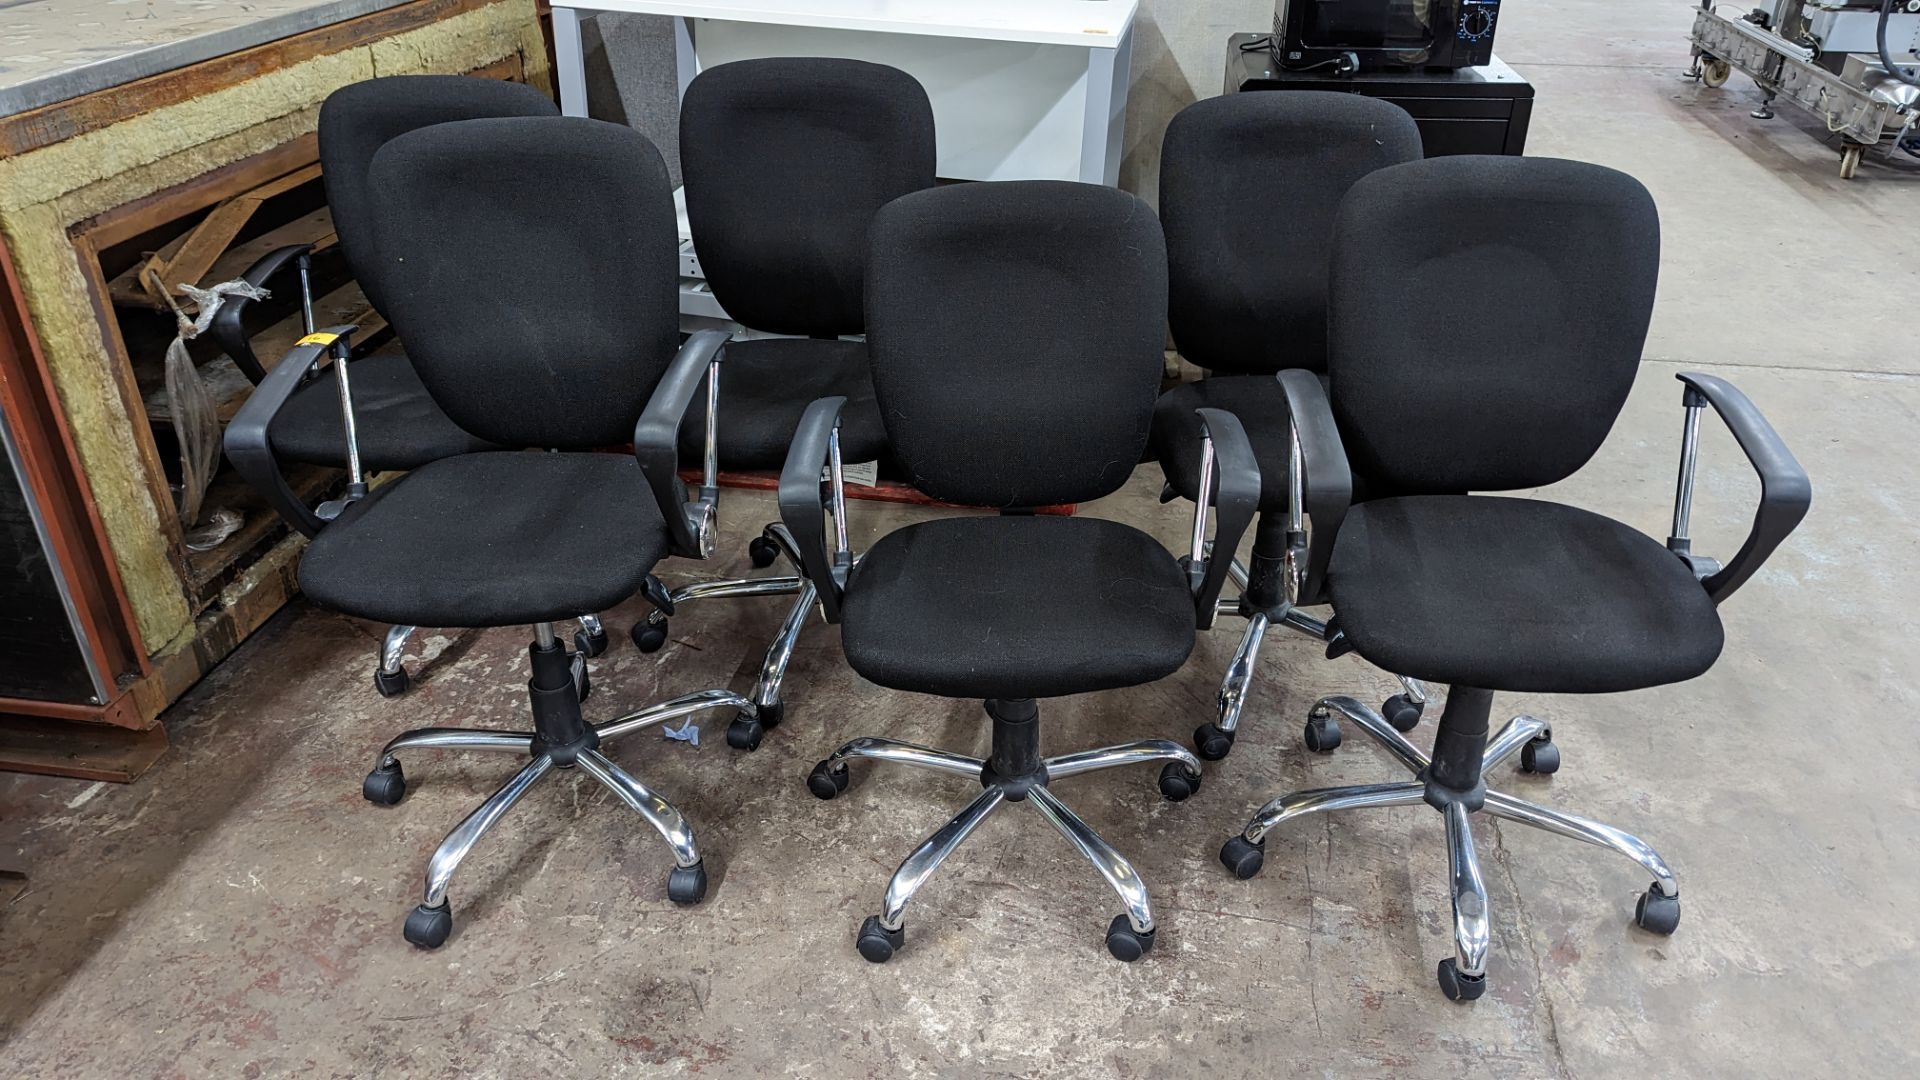 6 off matching chairs with arms - Image 2 of 6